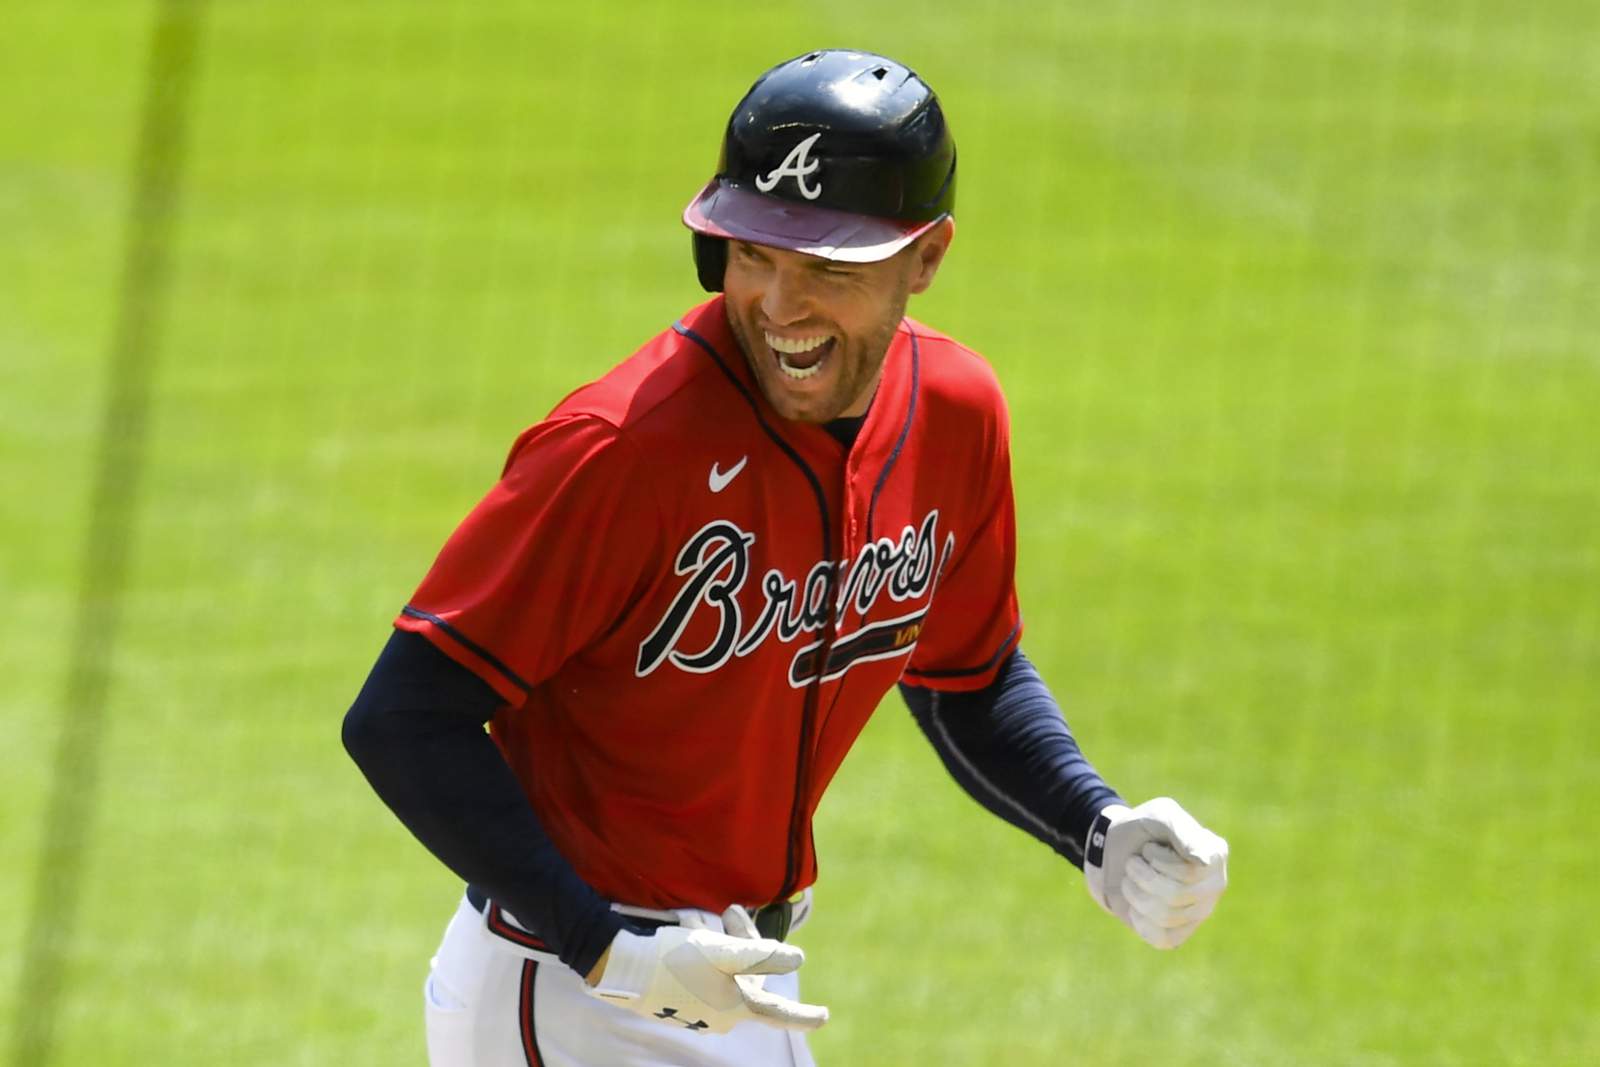 Braves' Freeman celebrates his new baby 'twins with a twist'